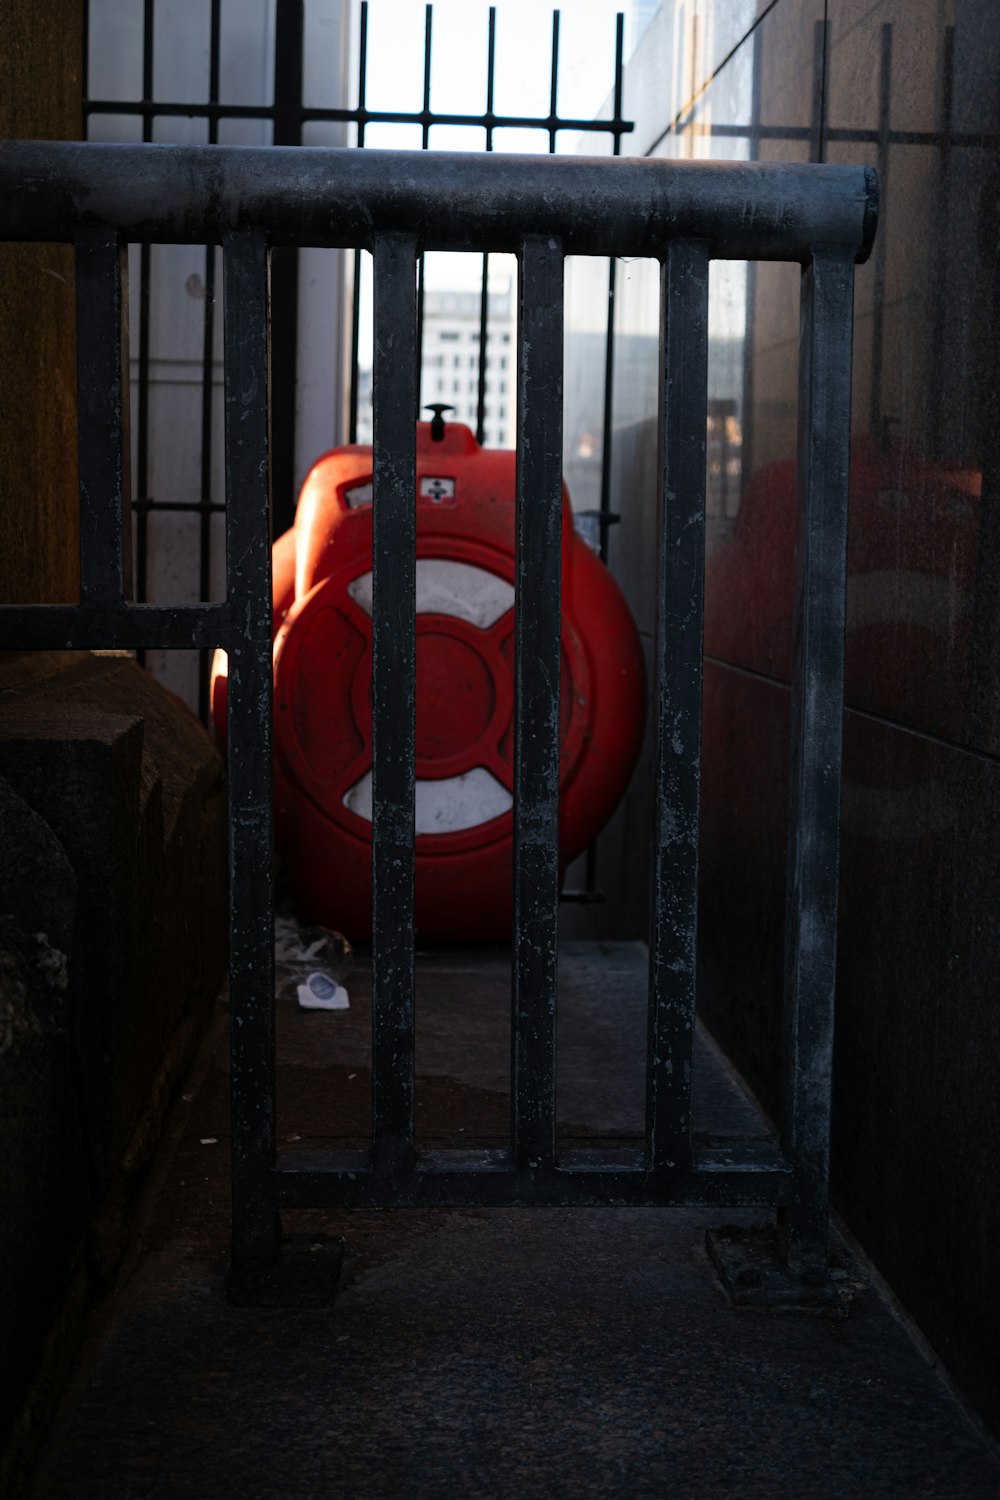 a red life preserver behind bars in a jail cell